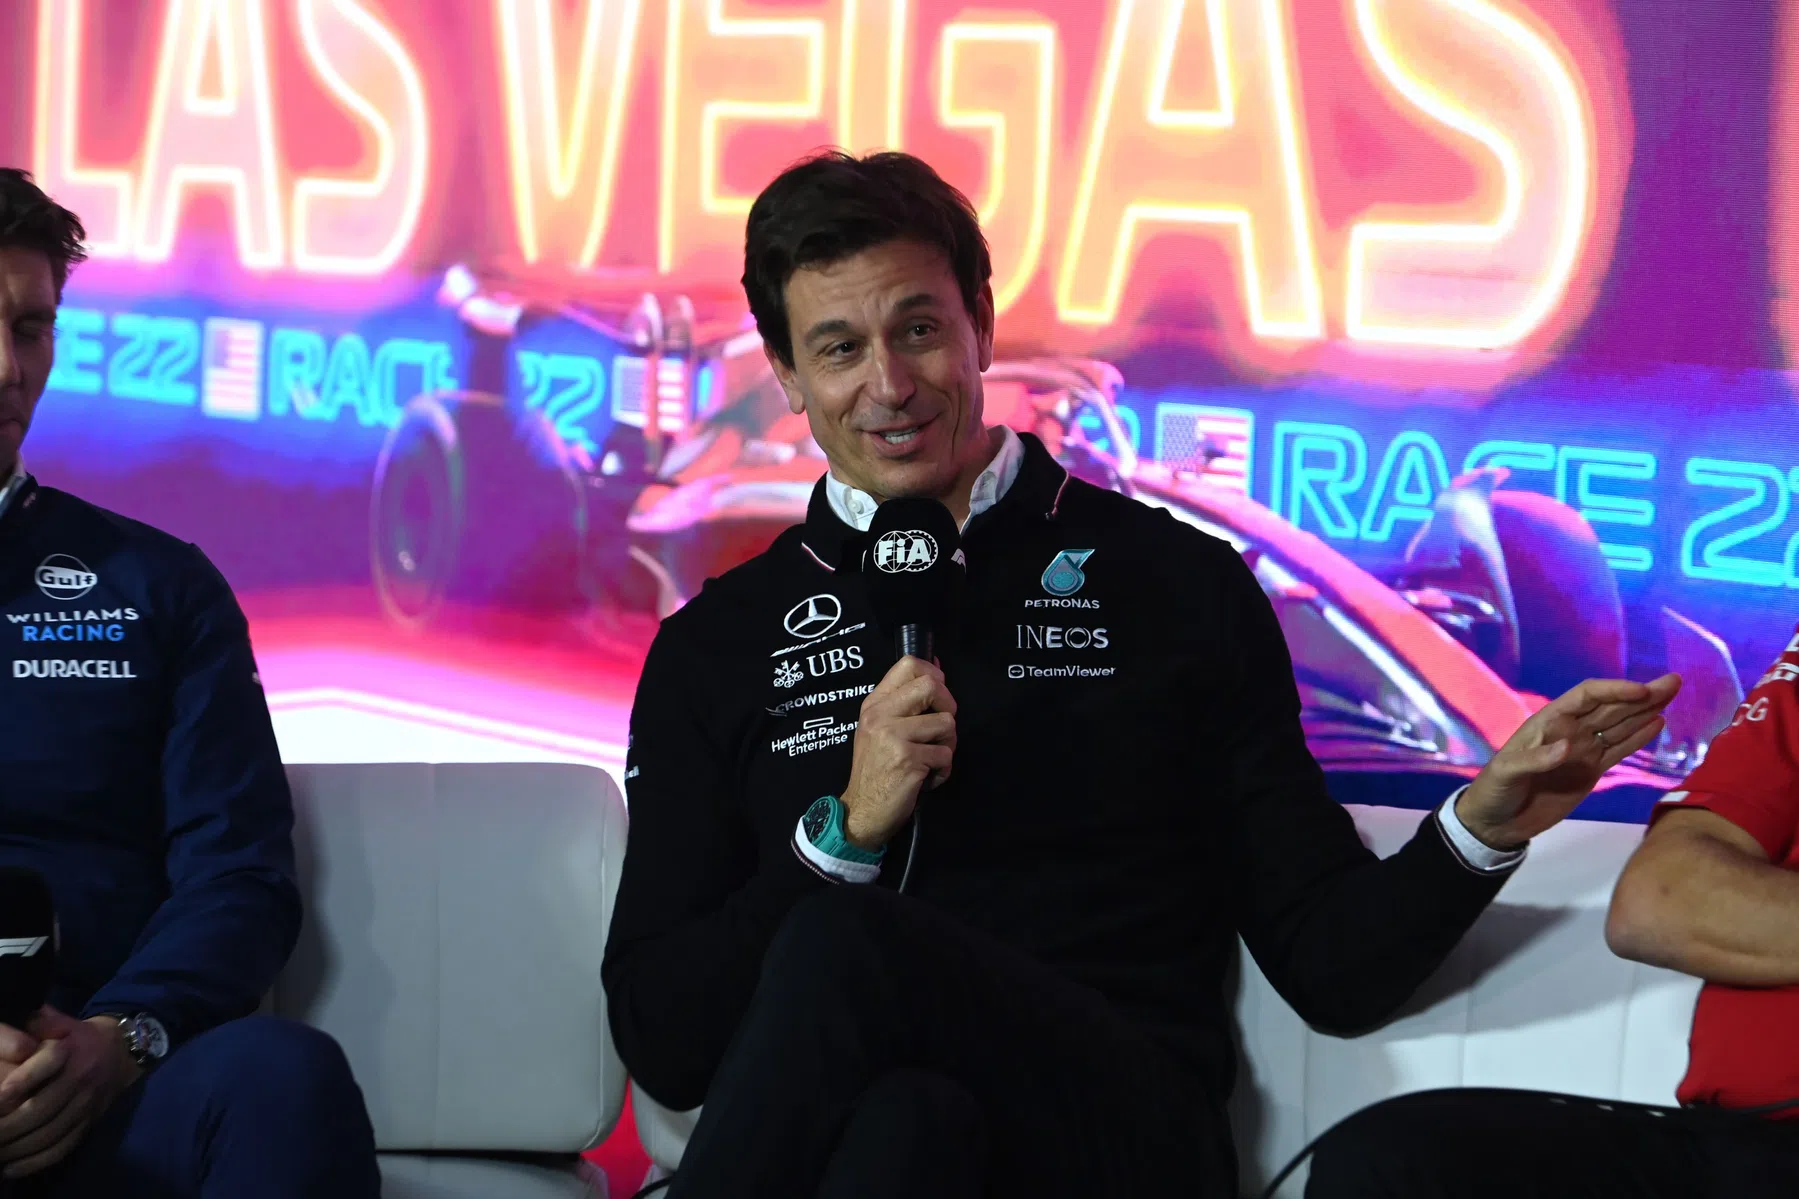 wolff takes on unhappy fans in las vegas